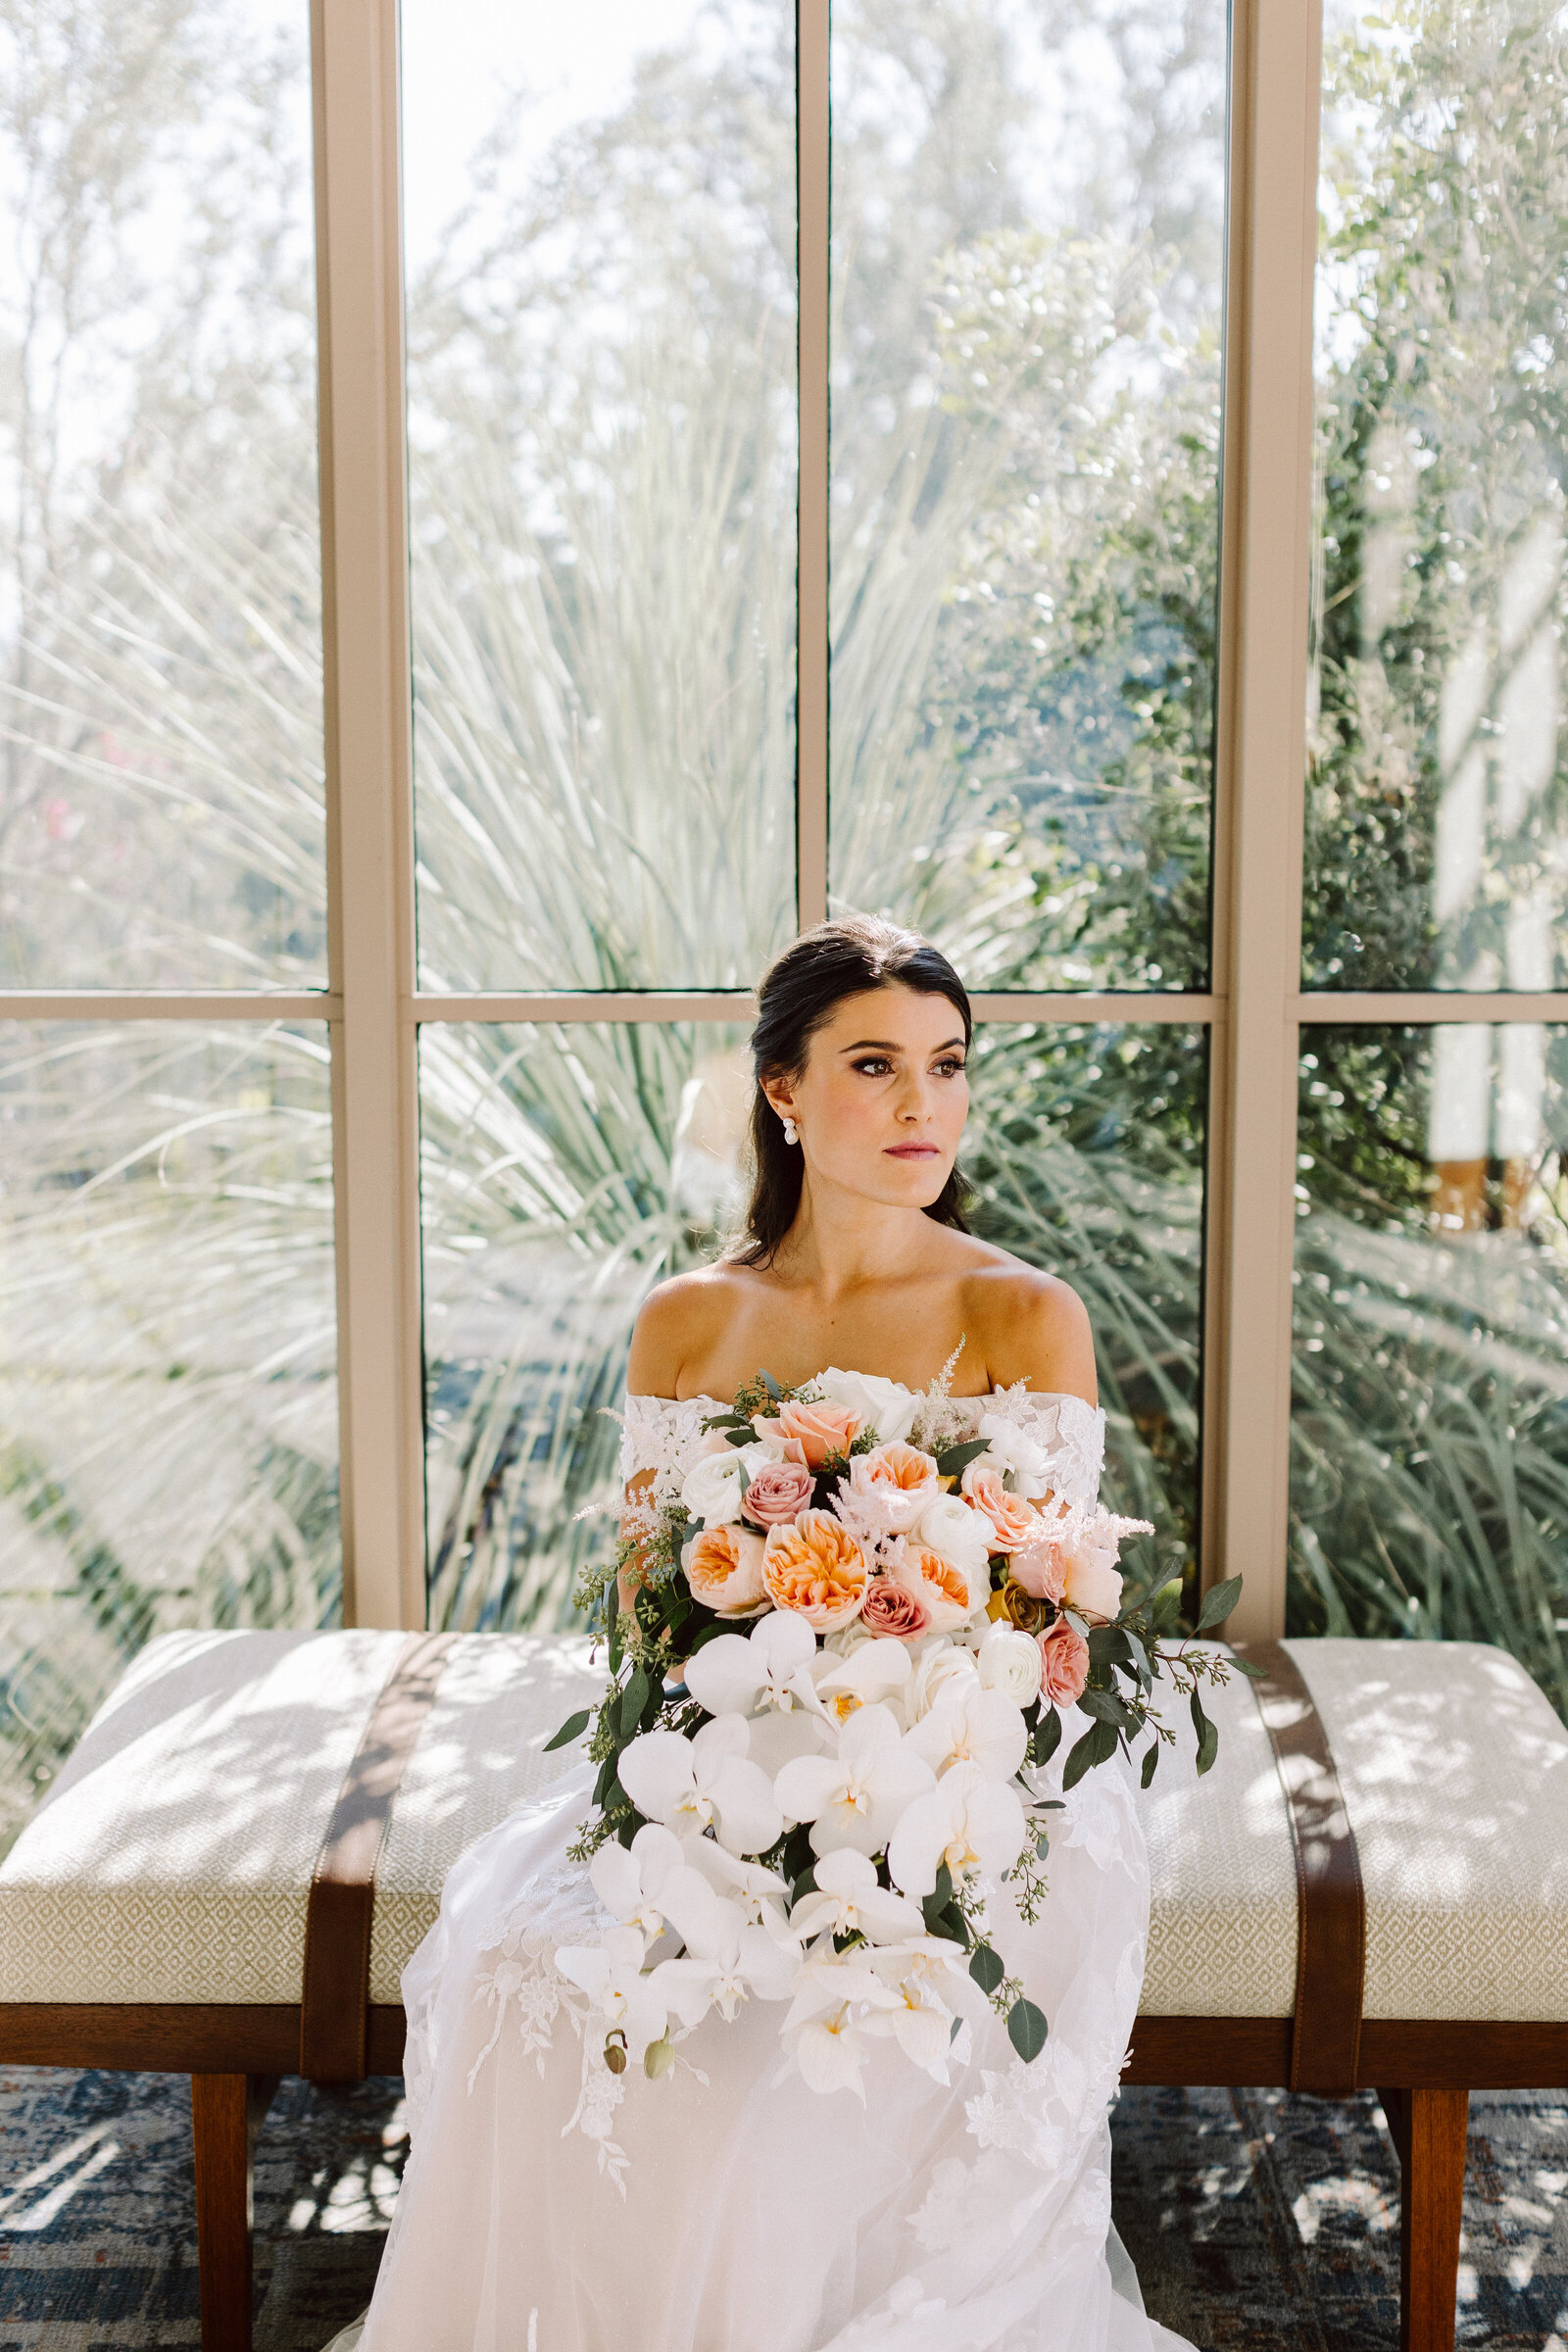 A bride sitting on a bench with a large bouquet of flowers in her hands.